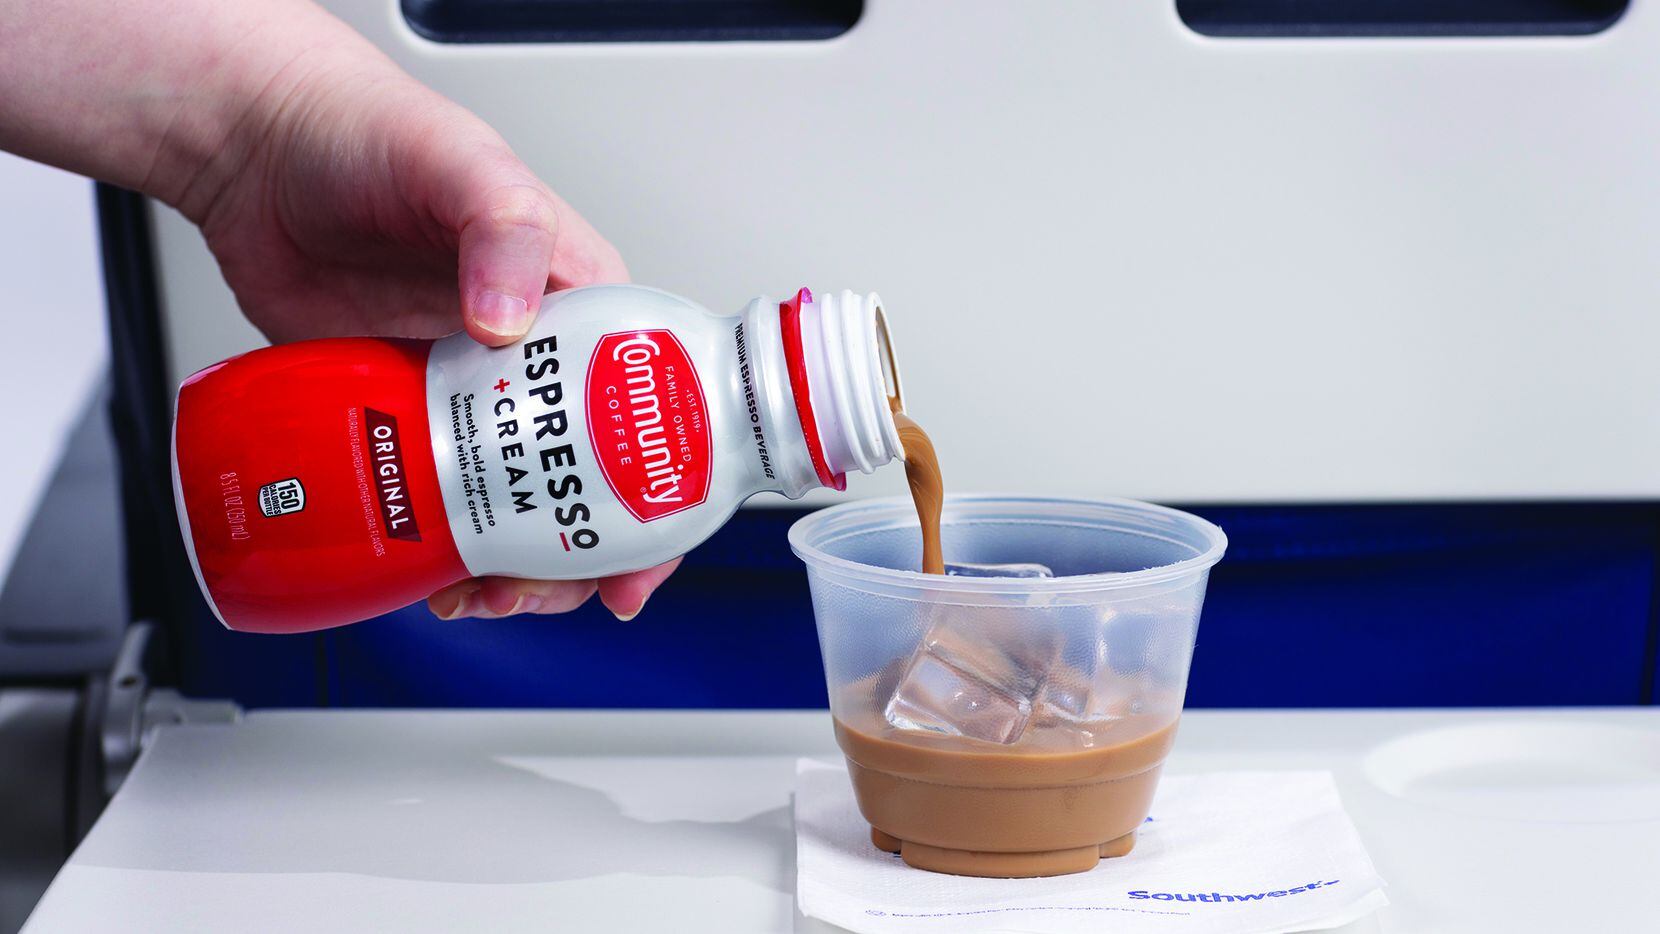 Southwest Airline is adding iced coffee to its in-flight drink menu.